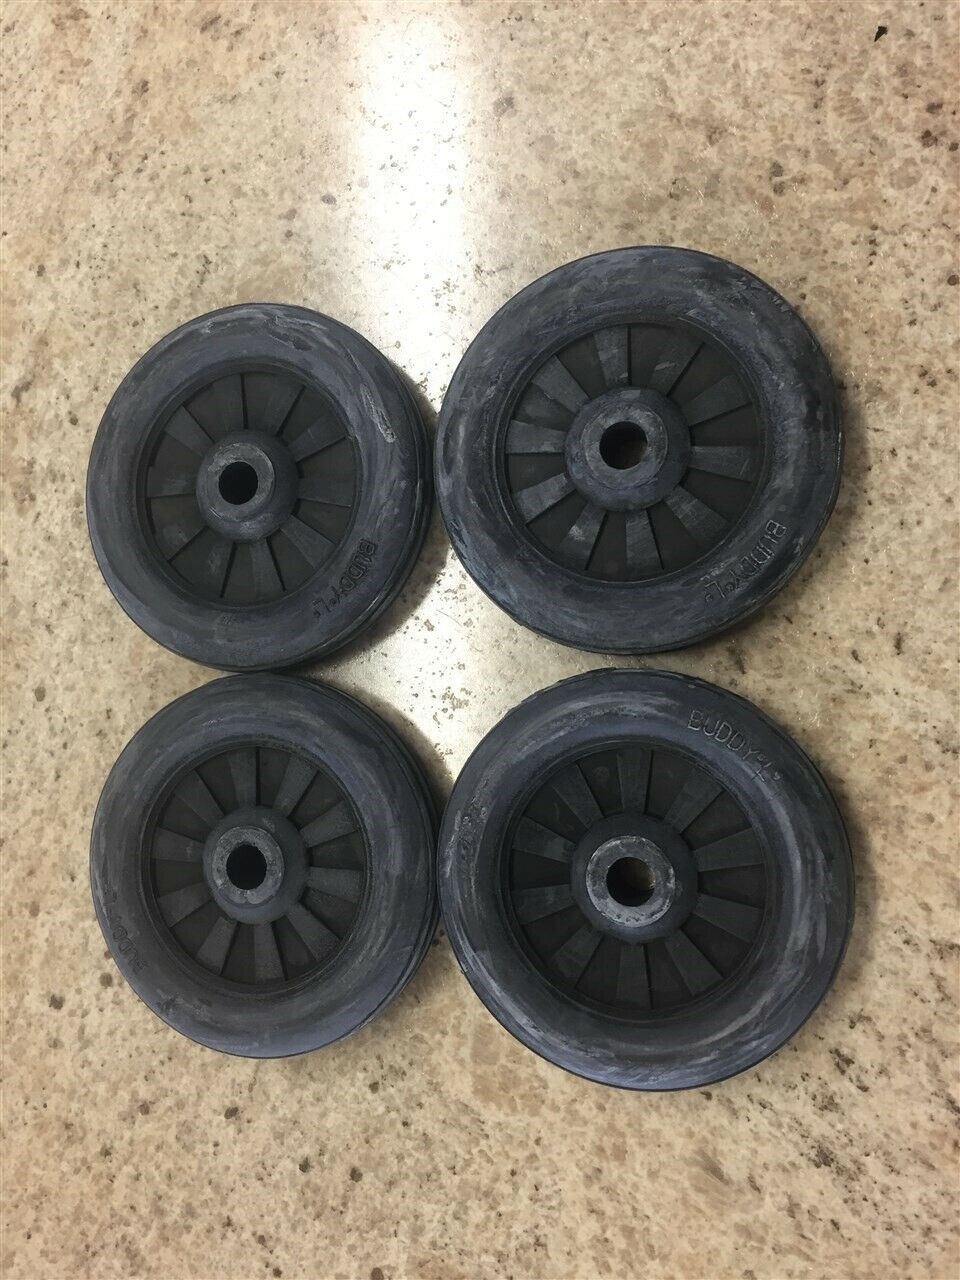 Set 4 Buddy L Simulated Spoke Rubber Wheel/tire Replacement Toy Parts Blp-016-4